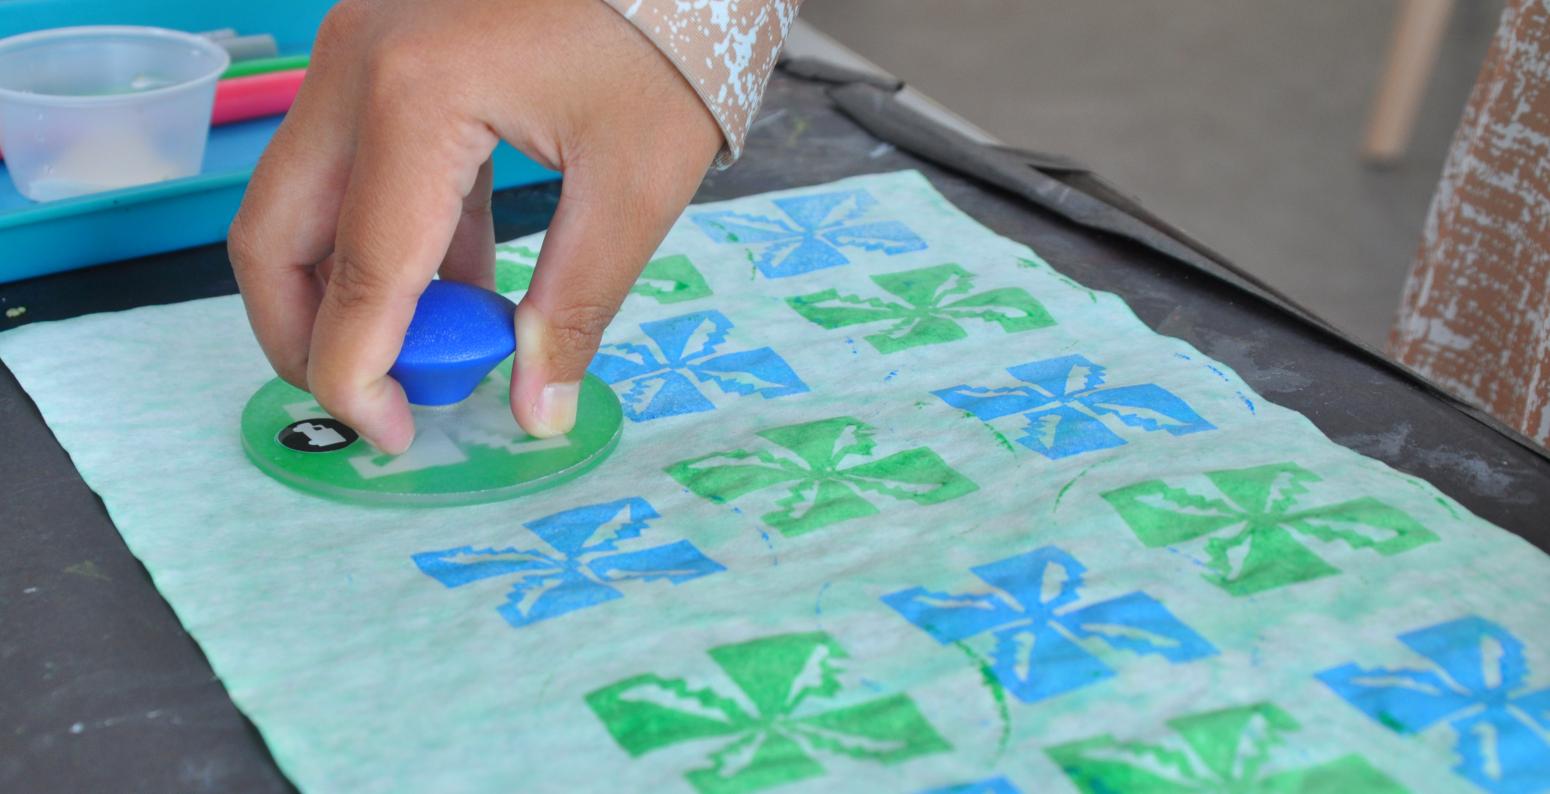 A hand presses a painted stamp onto a piece of dyed paper, creating a pattern inspired by batik.